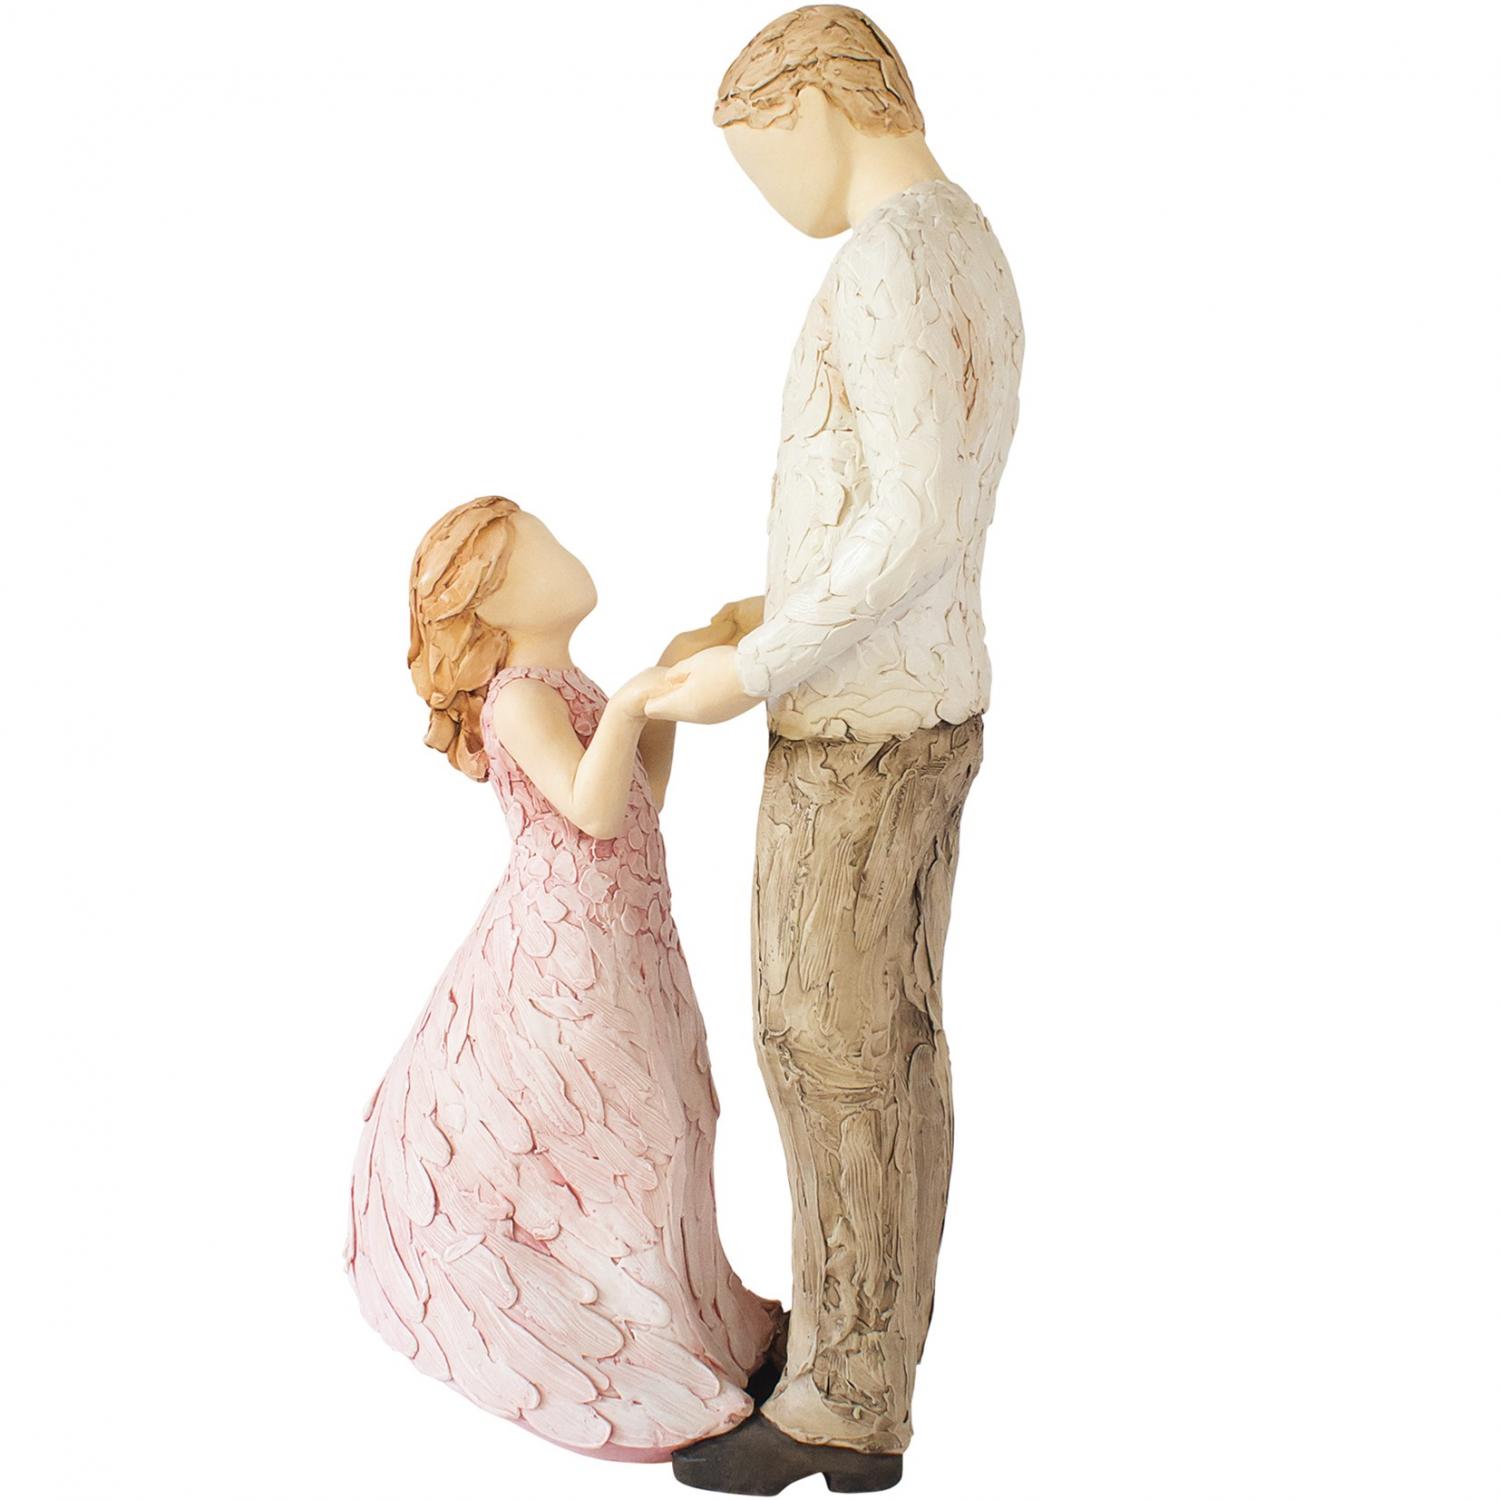 Thumbnail for 9610MTW More Than Words  Angel of Mine Gift Boxed 27cmH figures of father and daughter,  reveal the special relationships that both daughters and sons have with their dads.